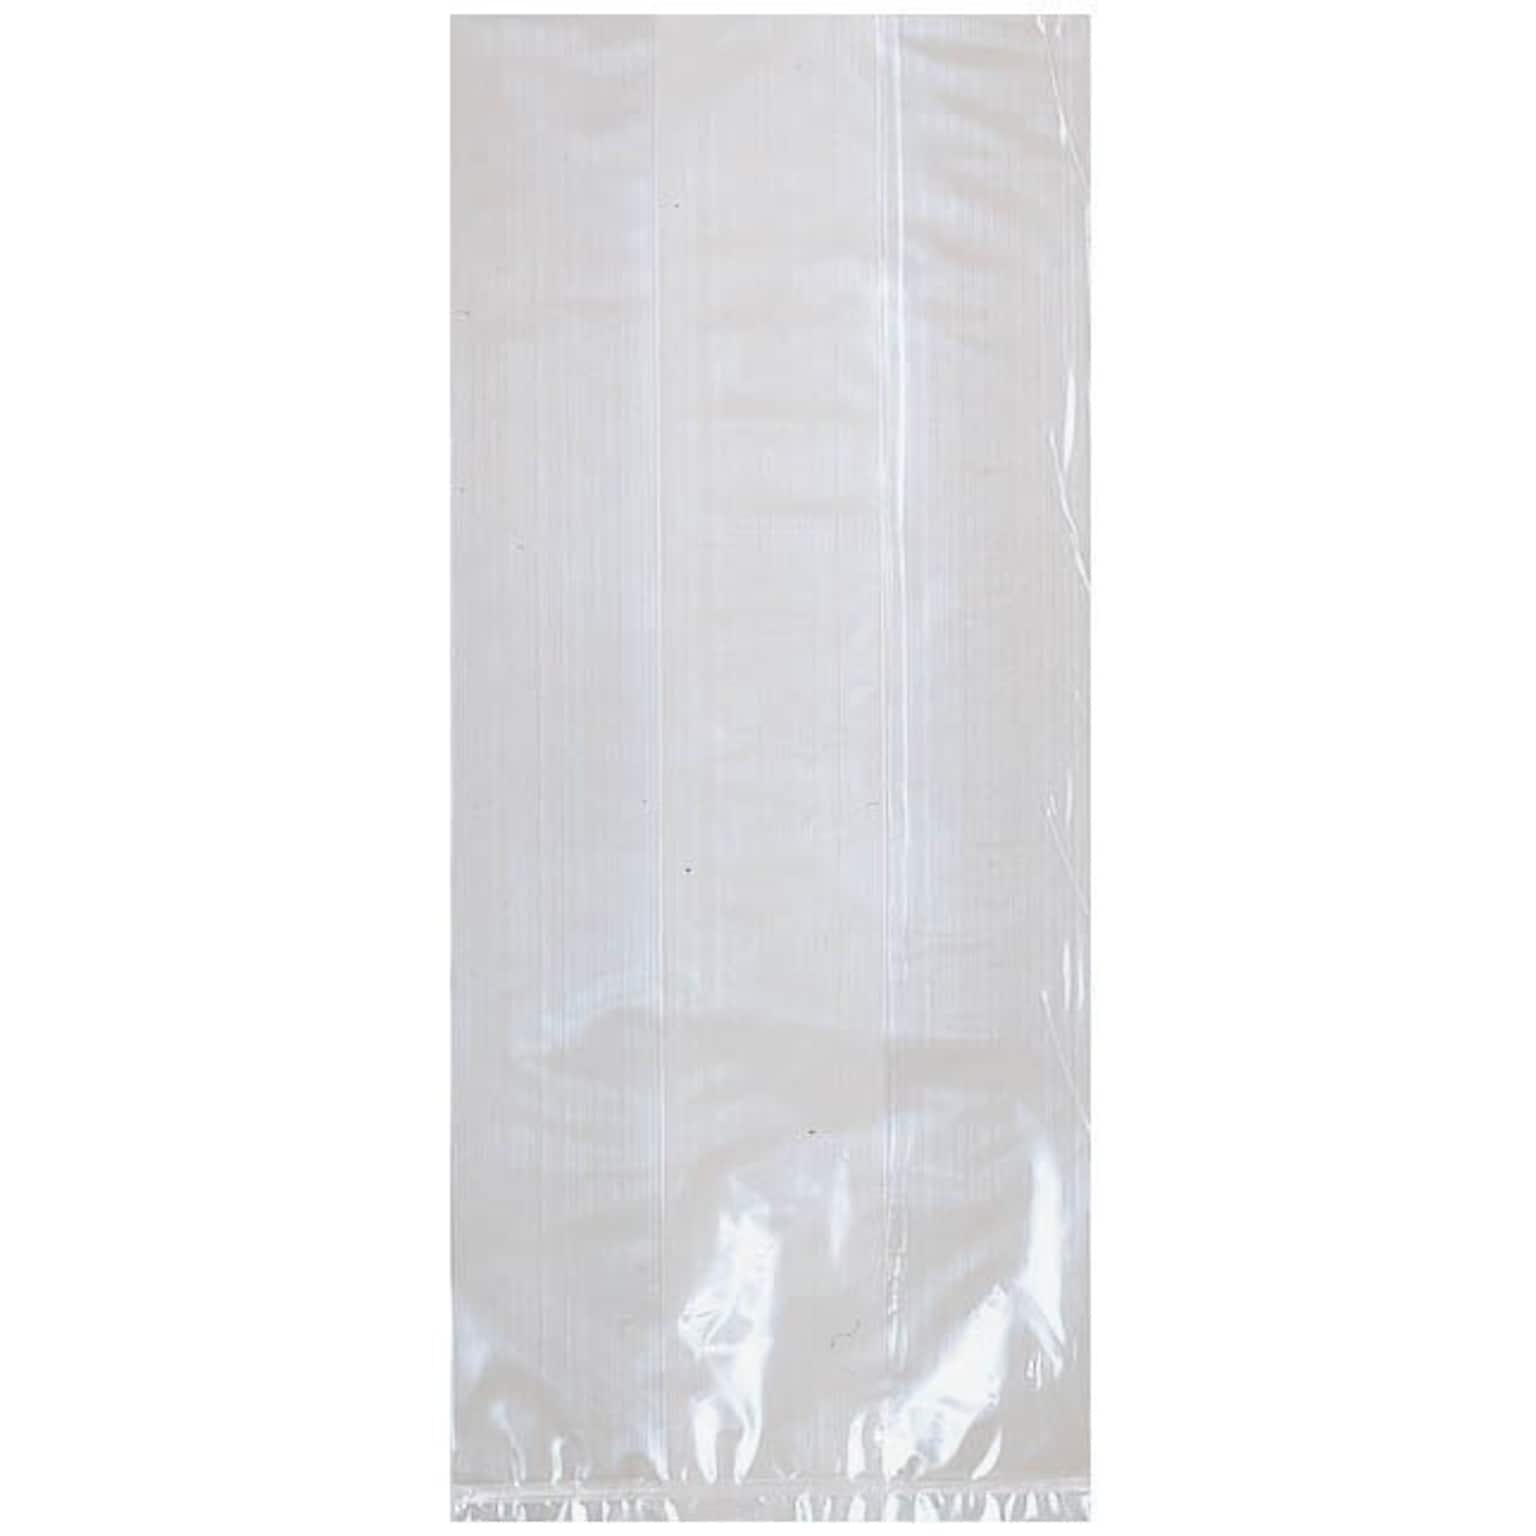 Amscan Cello Party Bag, 11.5 x 5, Clear, 9/Pack, 25 Bags/Pack (37102.86)